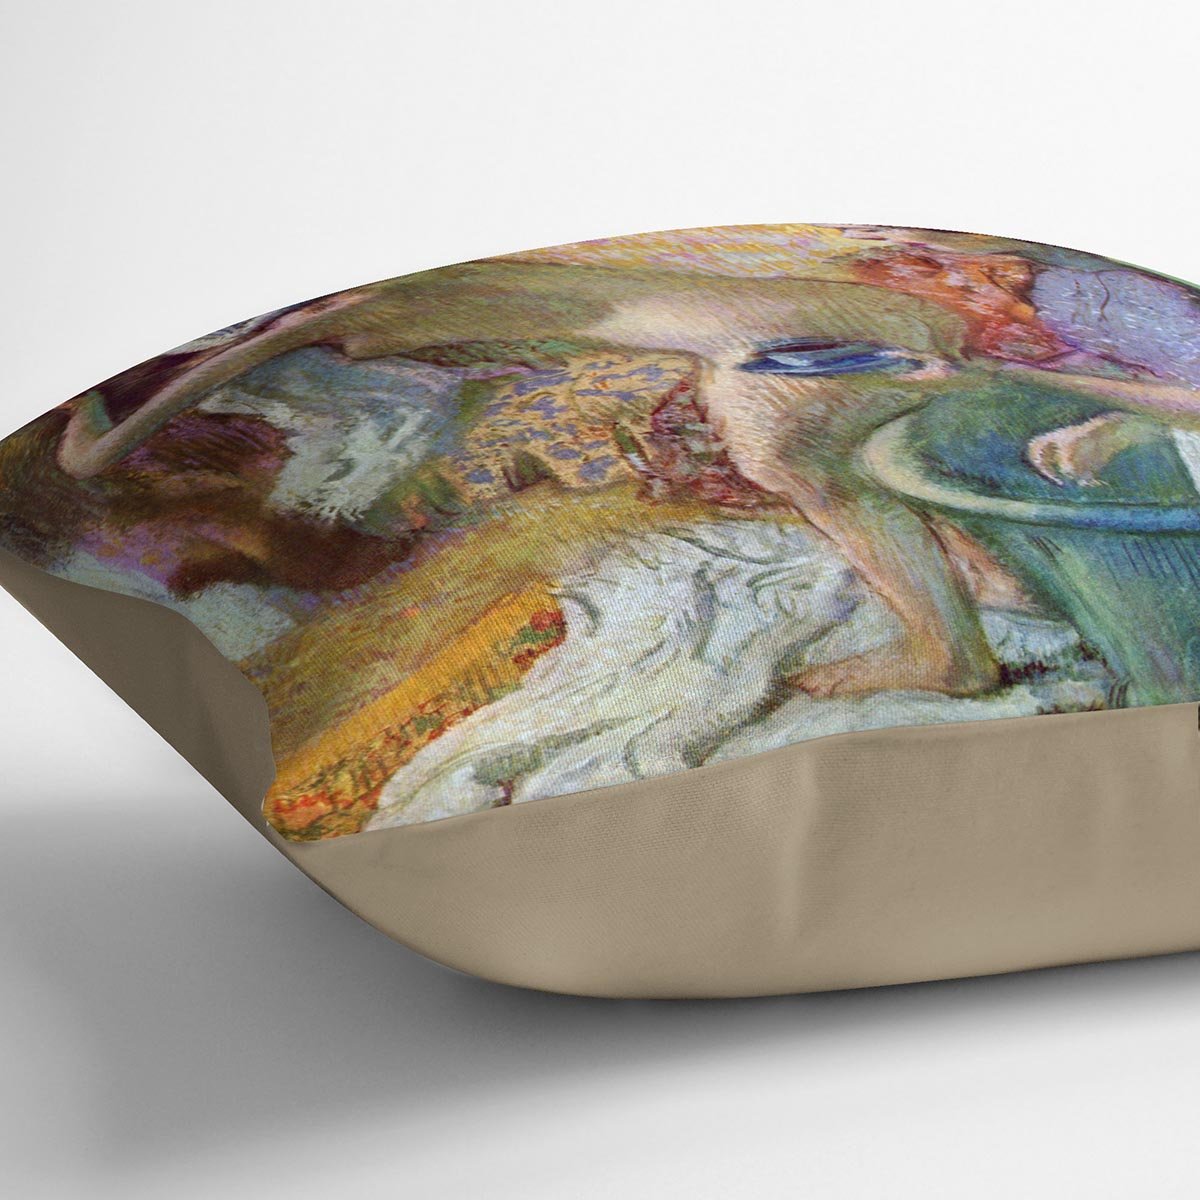 After bathing 1 by Degas Cushion